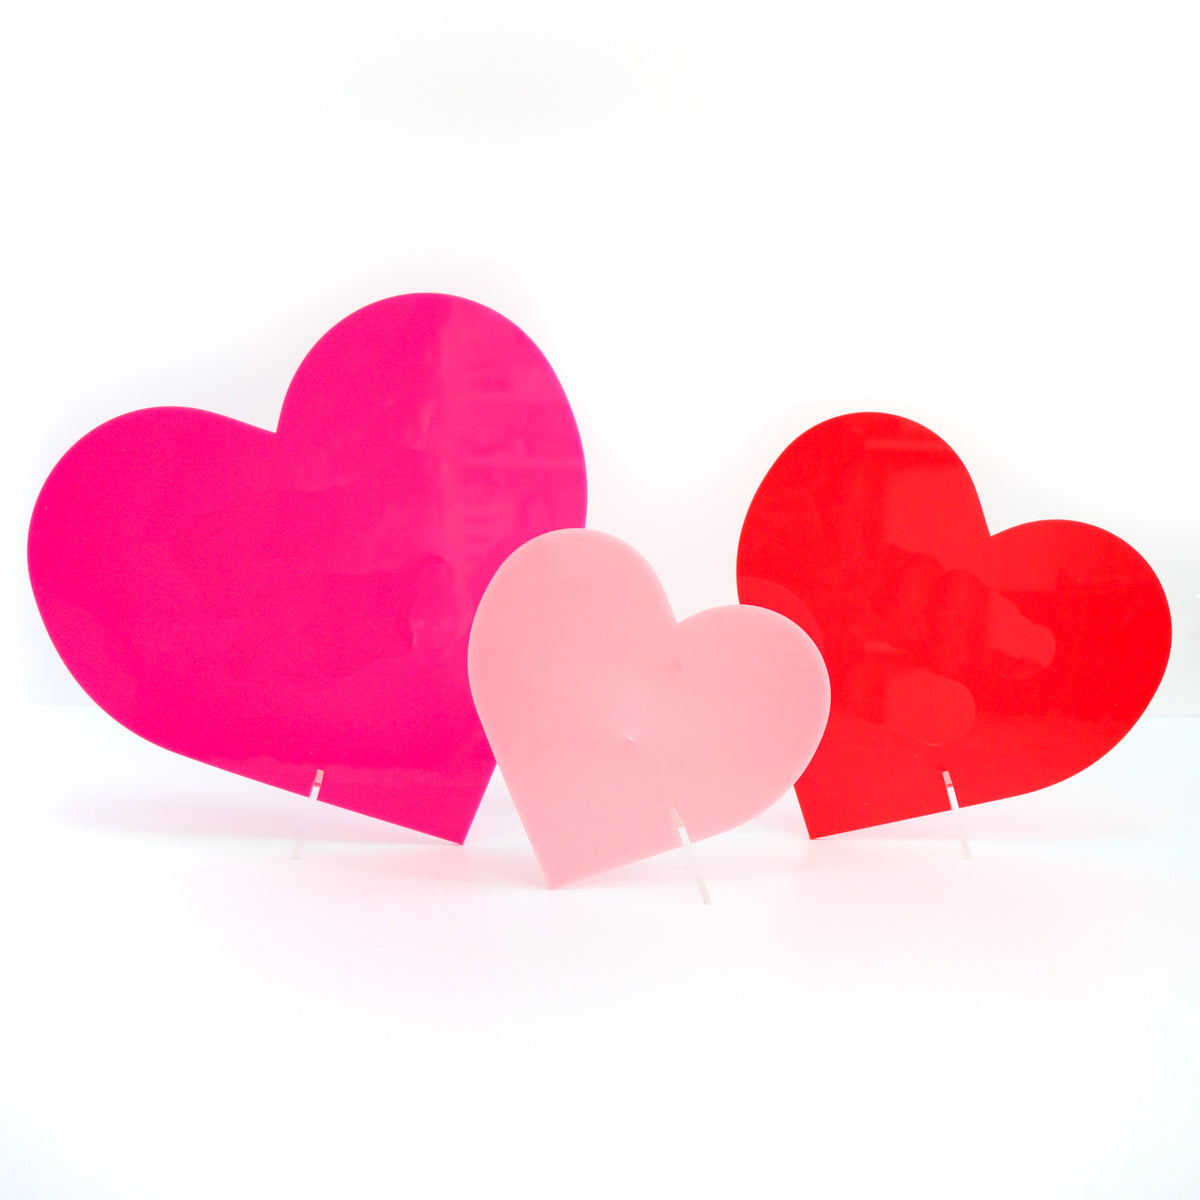 TUPARKA 210 Pcs Acrylic Hearts Red and Pink Acrylic Hearts Ornaments for  Table Decoration/Vase Fillers/Home Decoration in Valentine's Day or Wedding